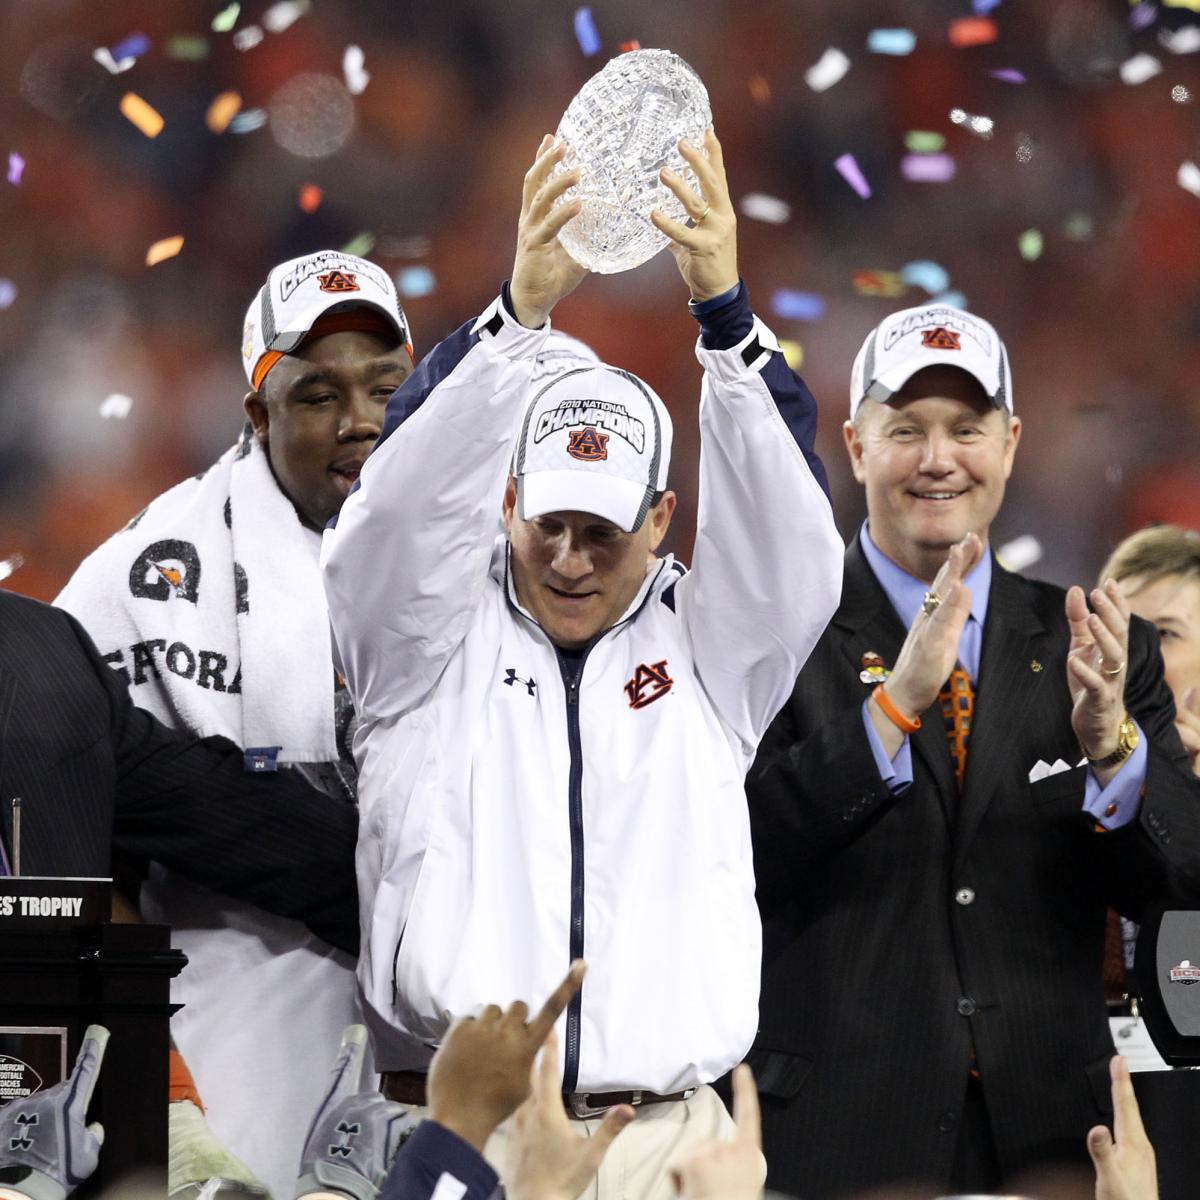 BCS Reaches Agreement on 4Team Football Playoff System News, Scores